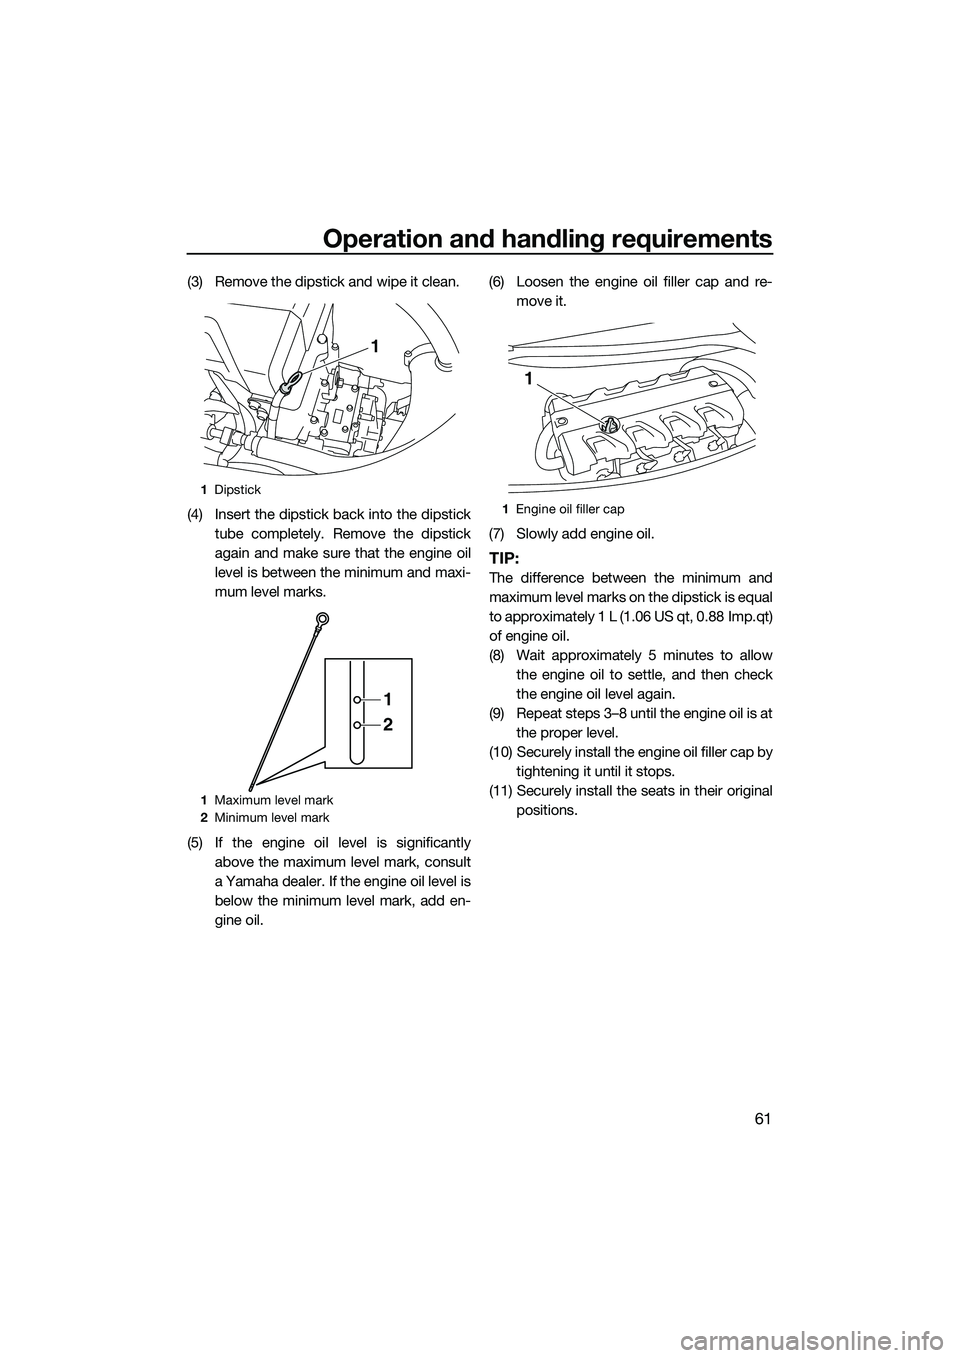 YAMAHA FX HO 2015  Owners Manual Operation and handling requirements
61
(3) Remove the dipstick and wipe it clean.
(4) Insert the dipstick back into the dipsticktube completely. Remove the dipstick
again and make sure that the engine